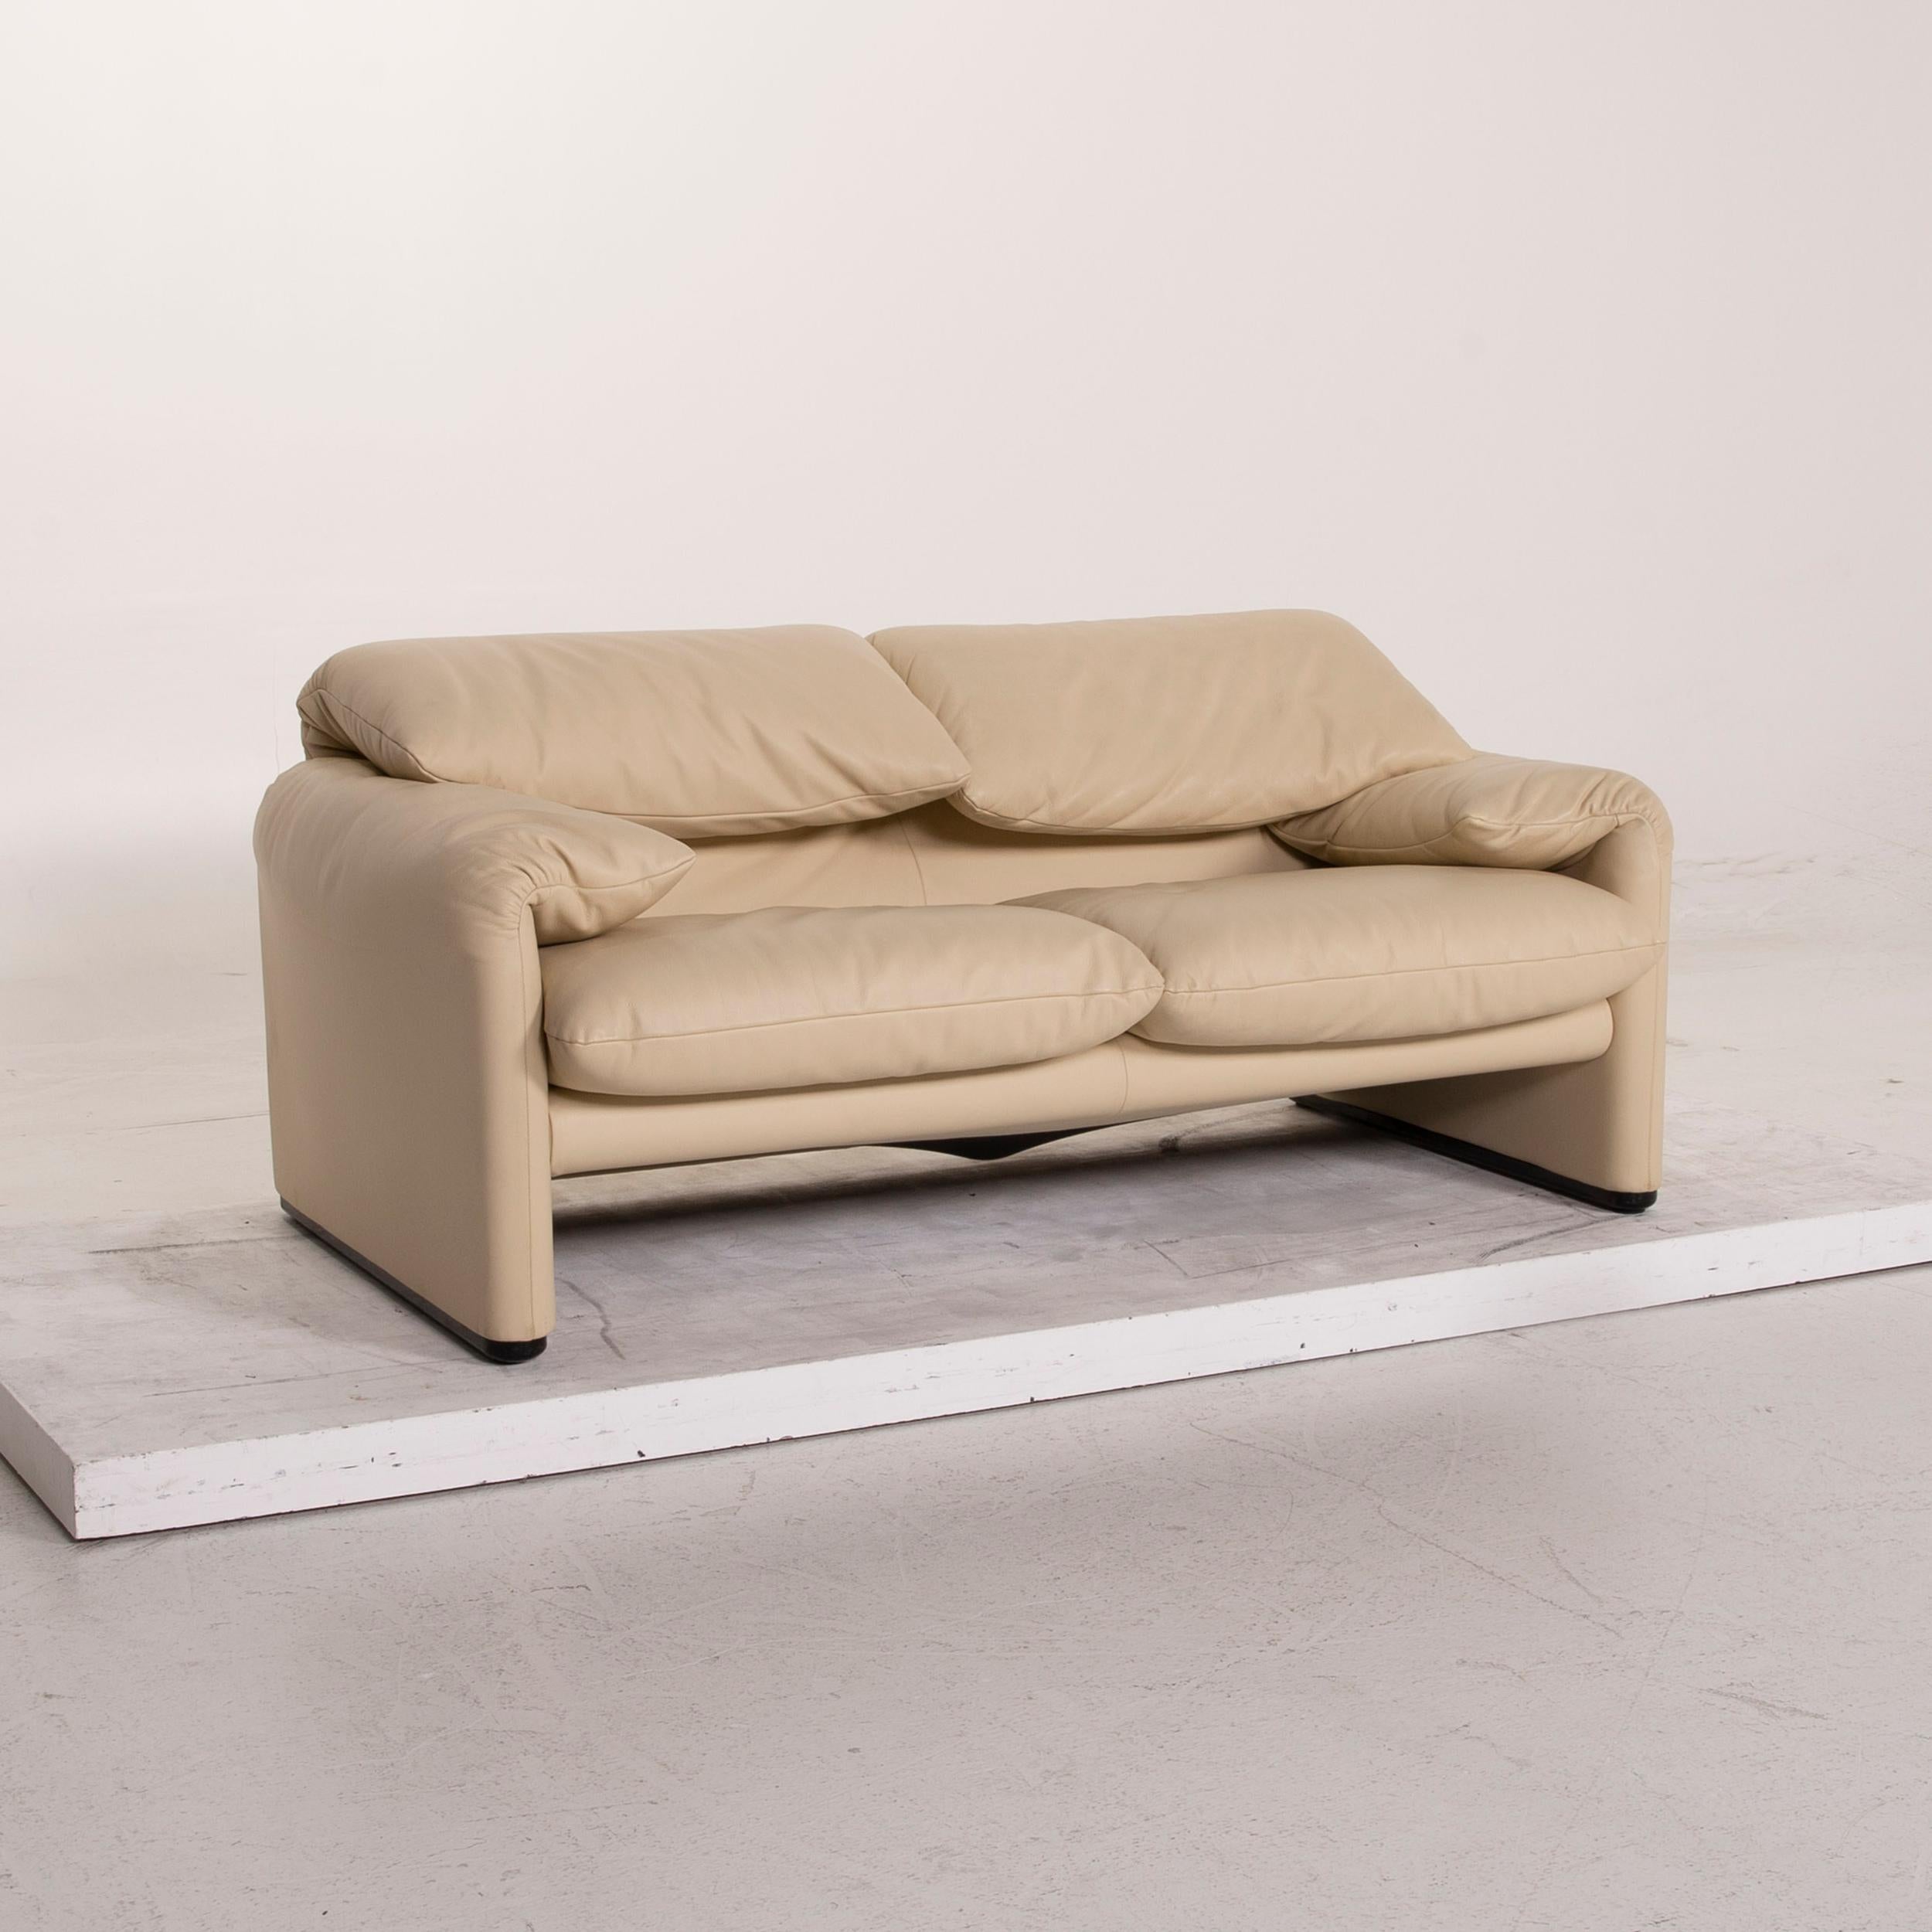 Cassina Maralunga Leather Sofa Cream Two-Seat In Excellent Condition For Sale In Cologne, DE